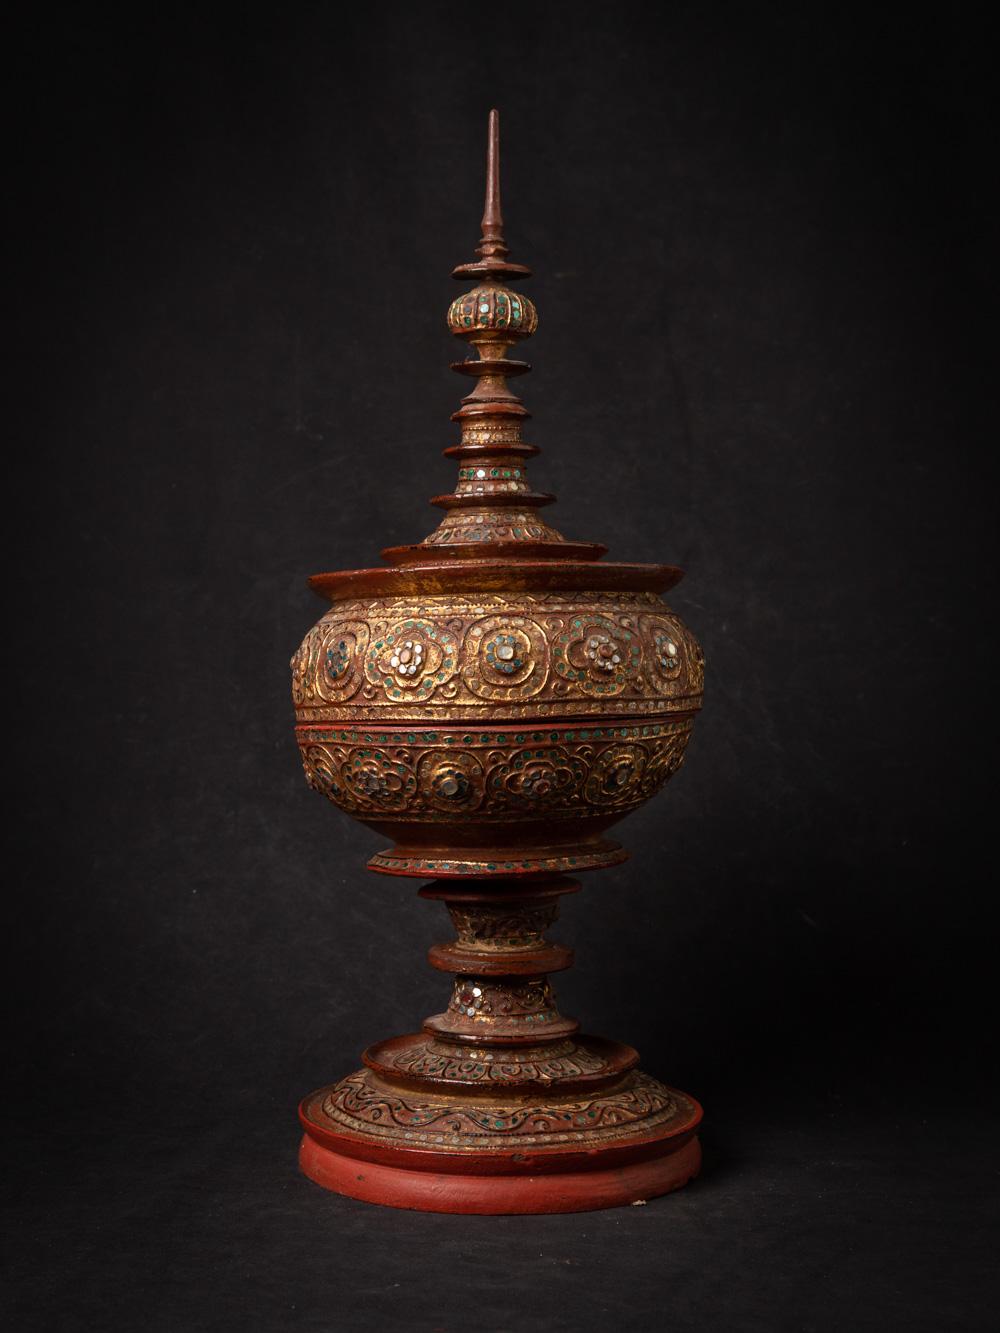 The antique wooden Burmese offering vessel is a remarkable and culturally significant artifact originating from Burma. Crafted from wood and gilded with 24-karat gold, this offering vessel stands at 53.5 cm in height and has a diameter of 21.5 cm.